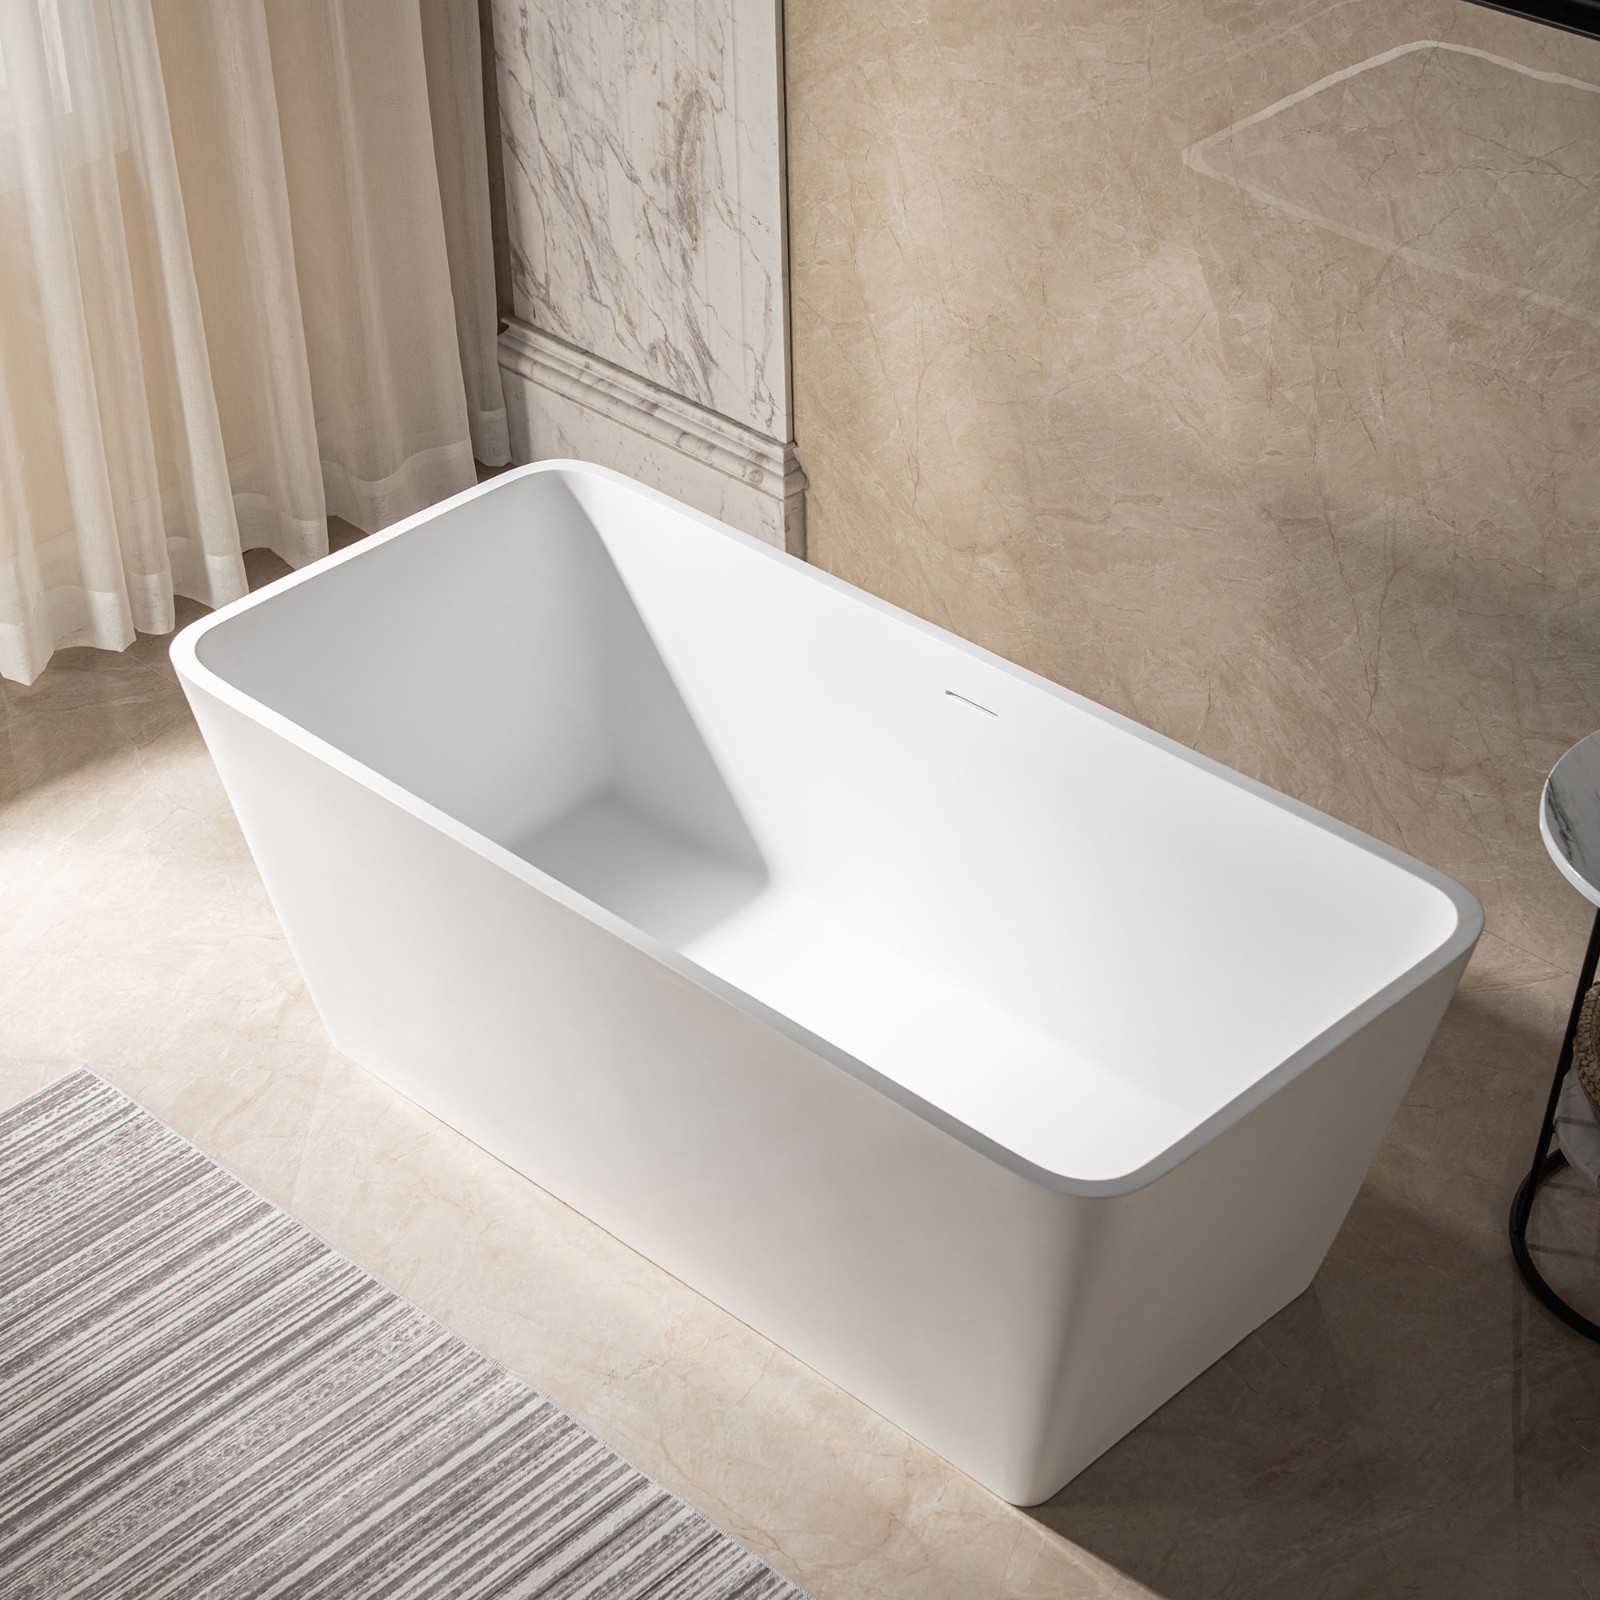  WOODBRIDGE 59 in. x 27.5 in. Luxury Contemporary Solid Surface Freestanding Bathtub in Matte White_7